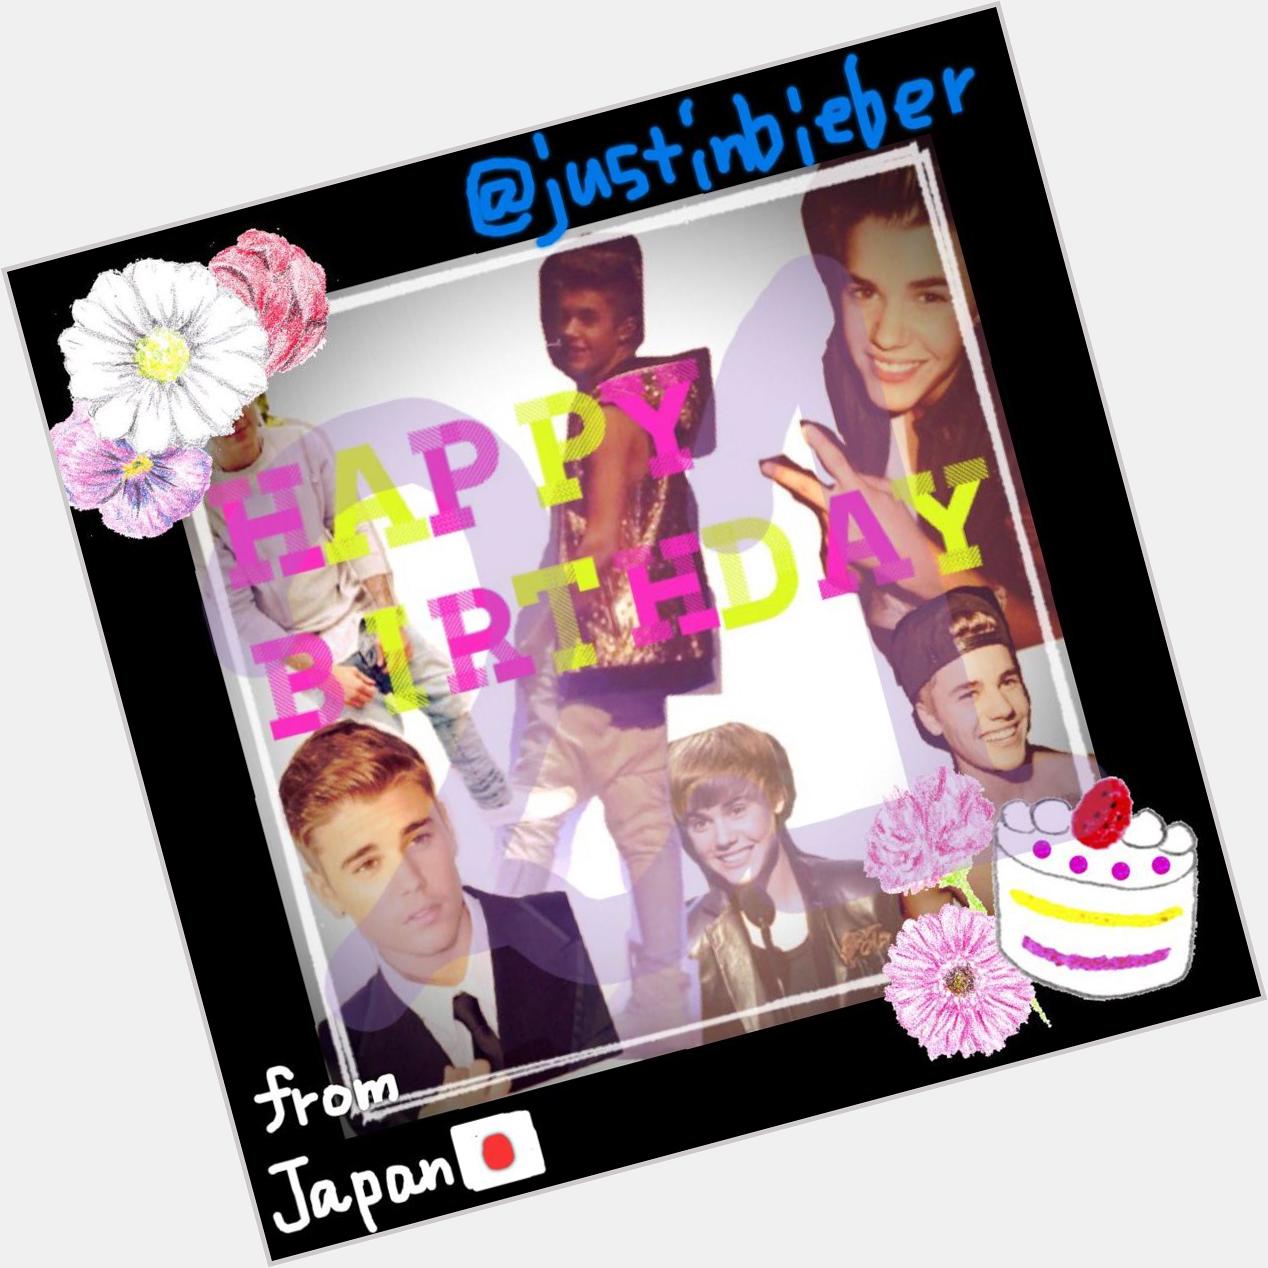 Happy 21nd birthday!!!!   Justin Bieber   I hope for your happiness.
I love you forever. xxx  